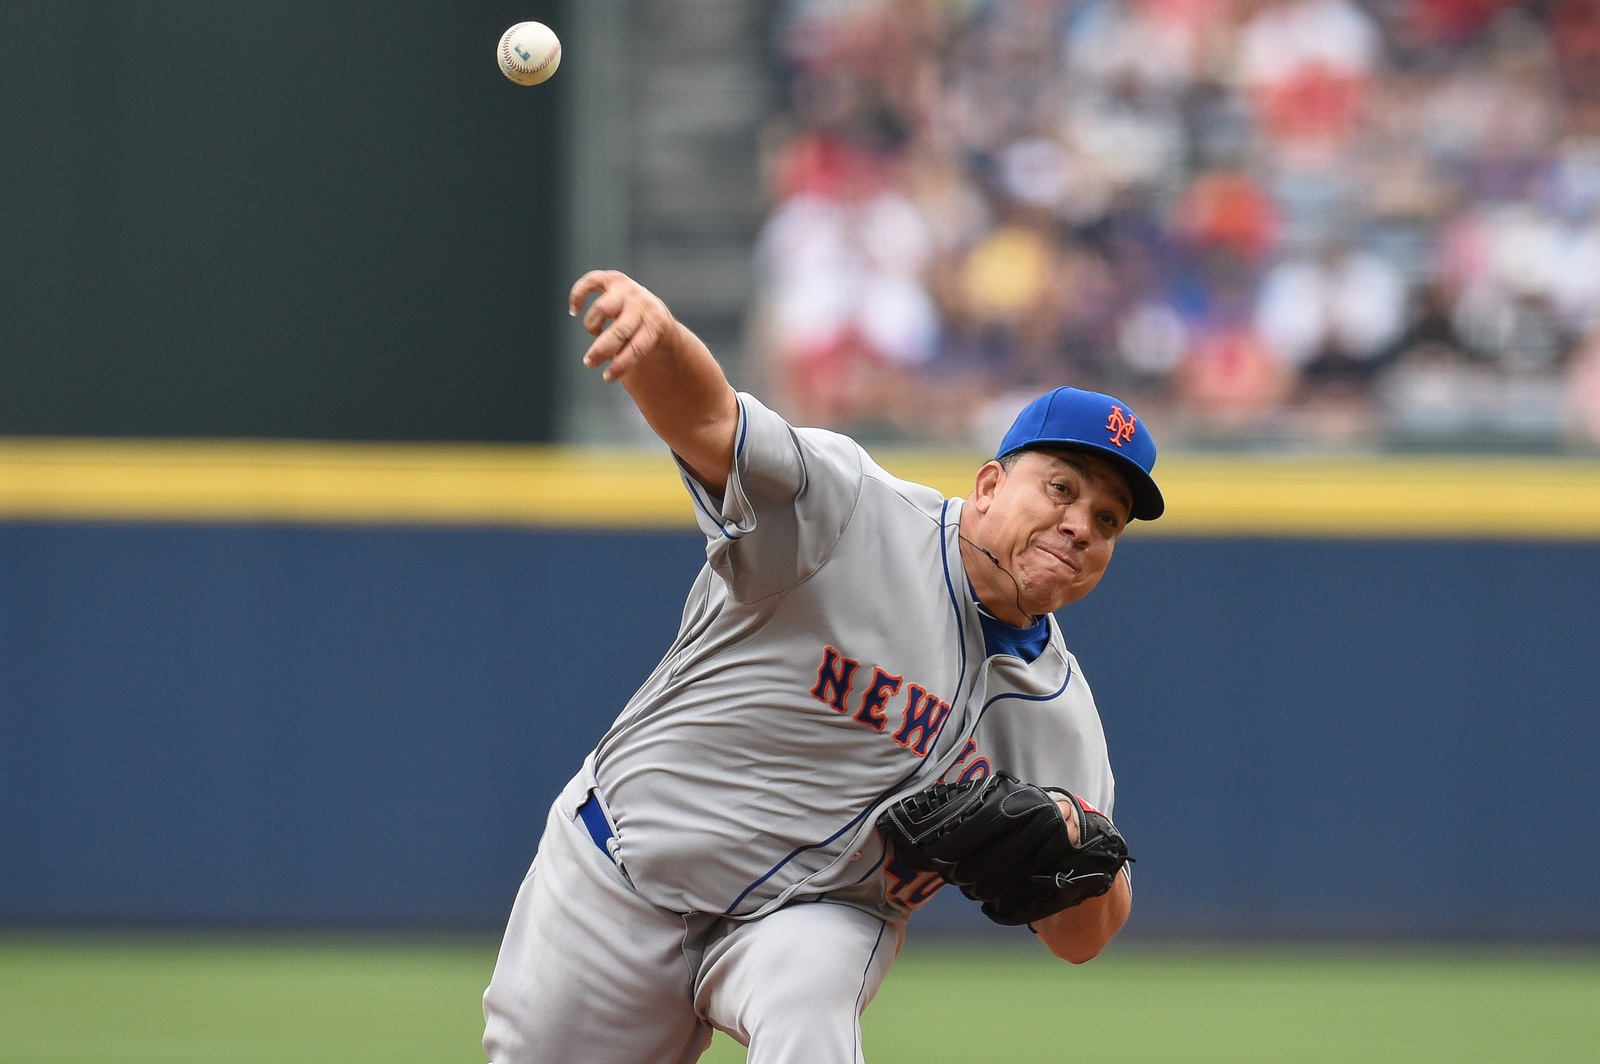 WATCH: Bartolo Colon hits first RBI single since 2005 (and loses helmet) 